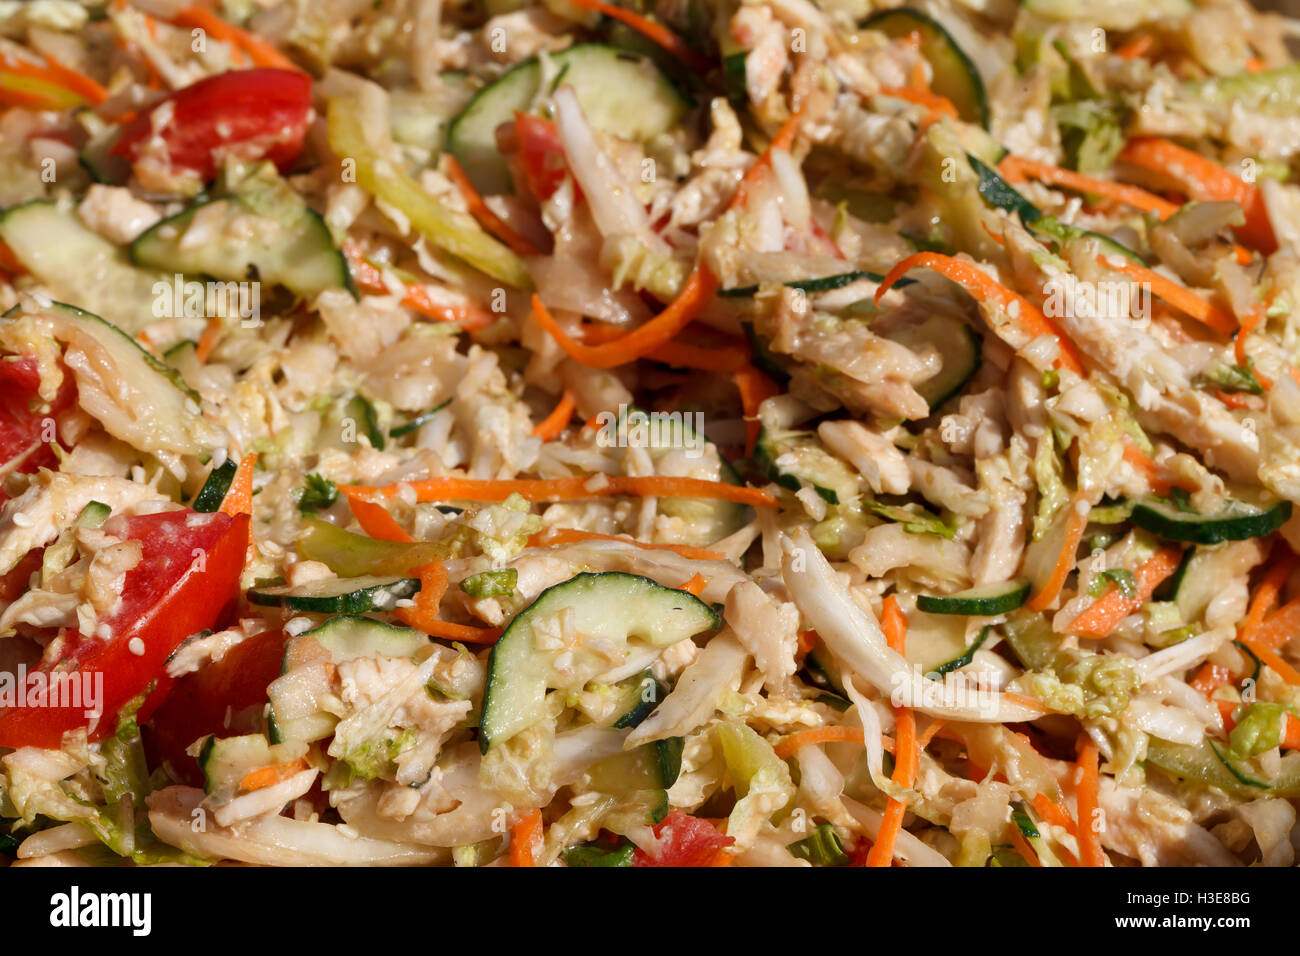 a vegetarian salad from fresh vegetables close up Stock Photo